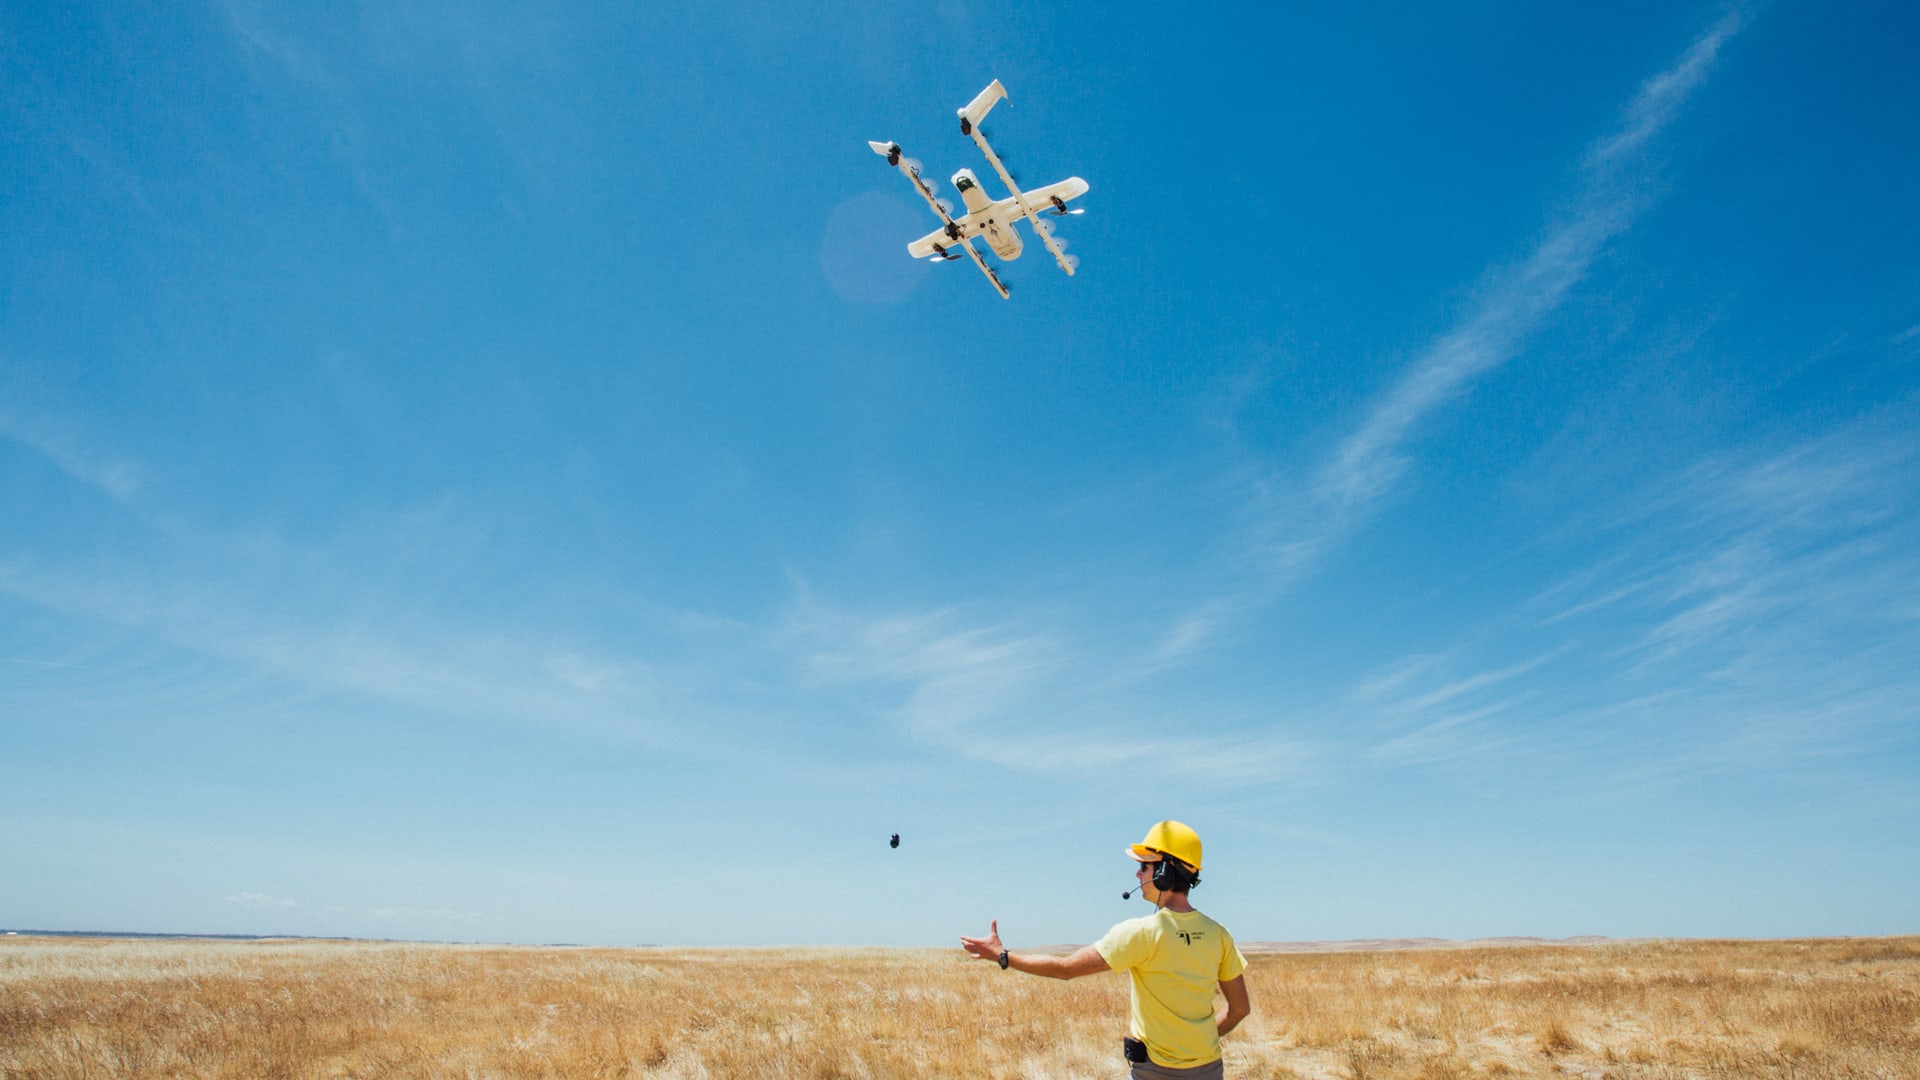 Google spinoff Wing earns first FAA approval for drone delivery